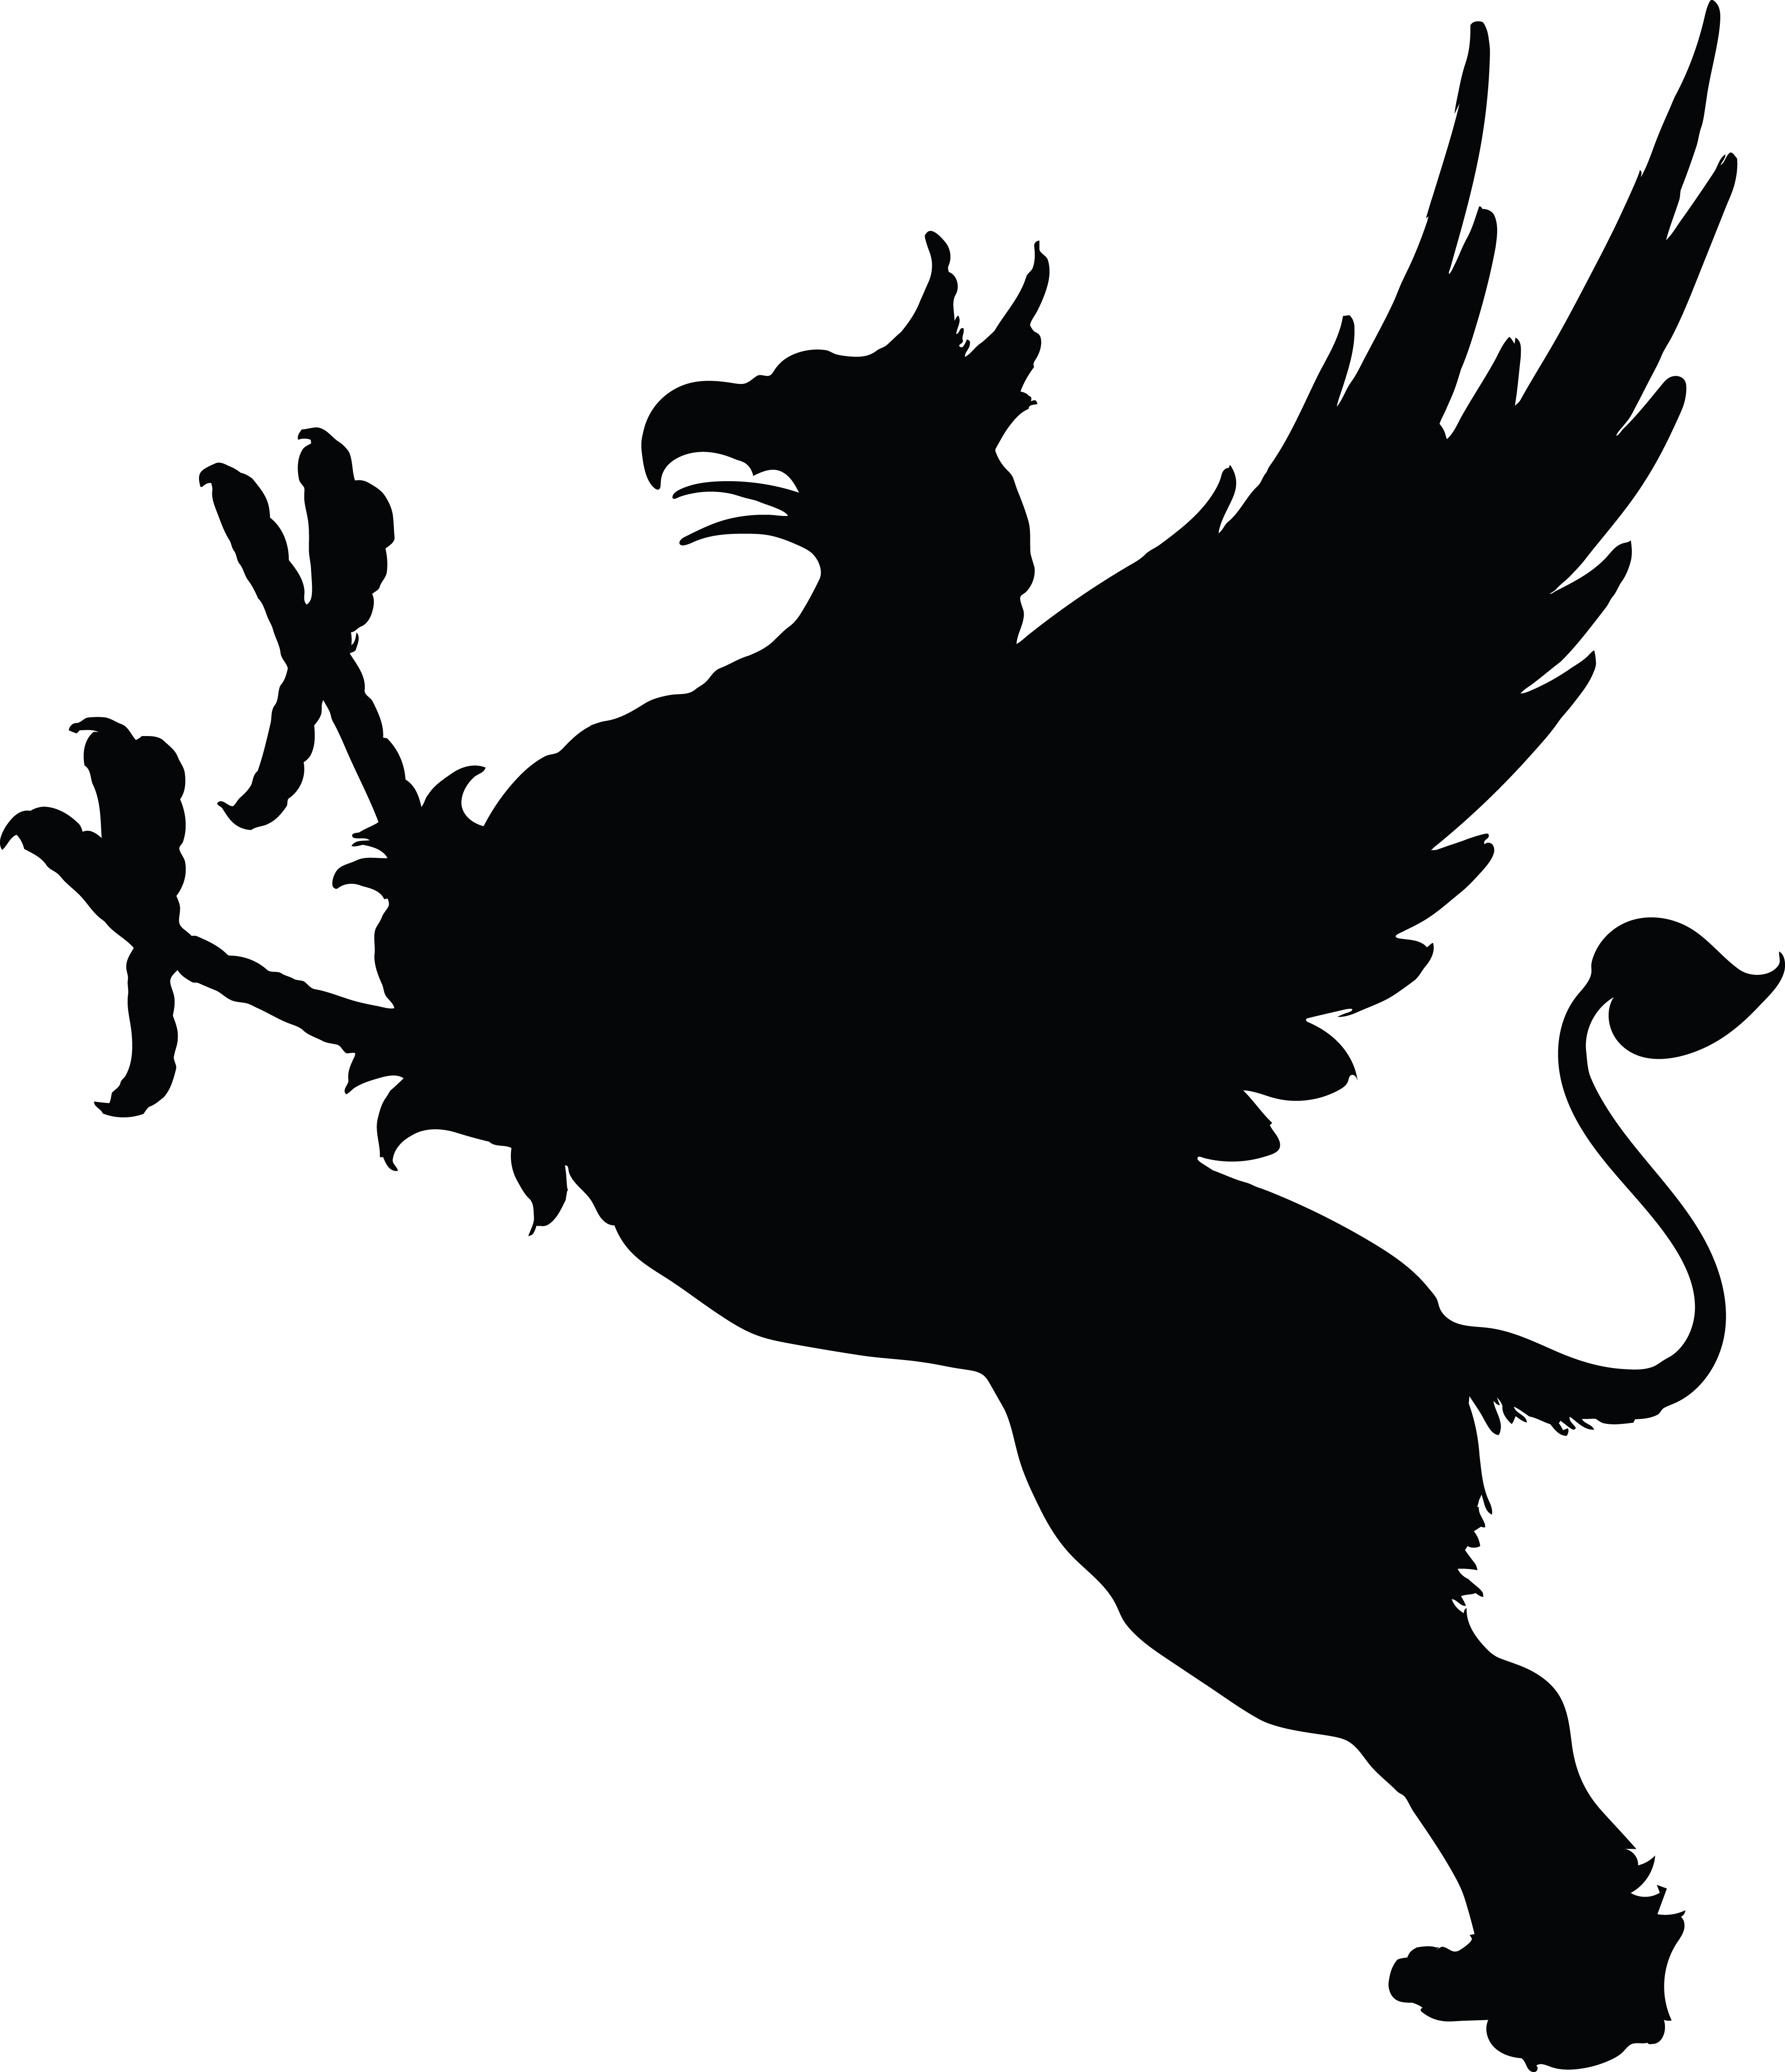 Griffin clipart #1, Download drawings